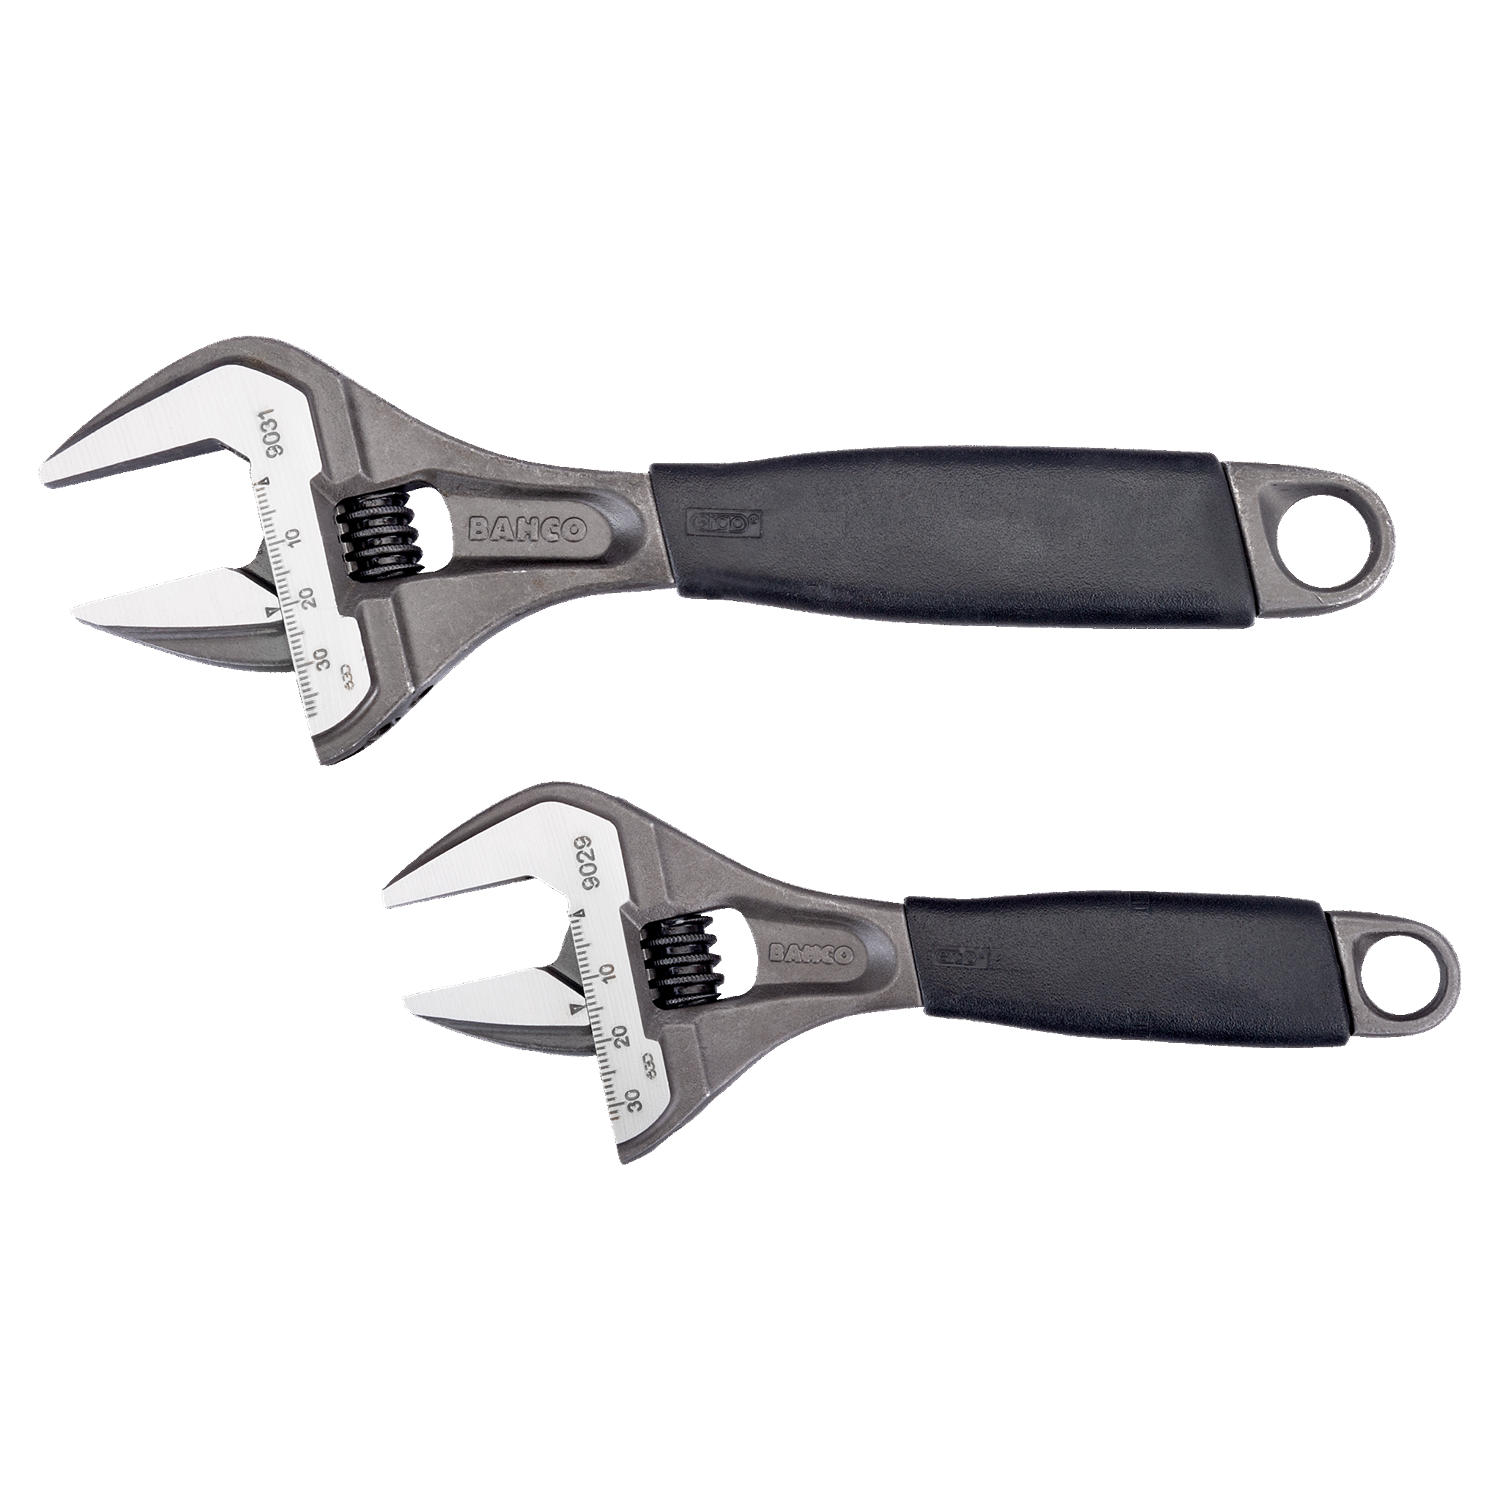 BAHCO ADJUST9031/29 ERGO Adjustable Wrench Twin Pack - Premium Adjustable Wrench from BAHCO - Shop now at Yew Aik.